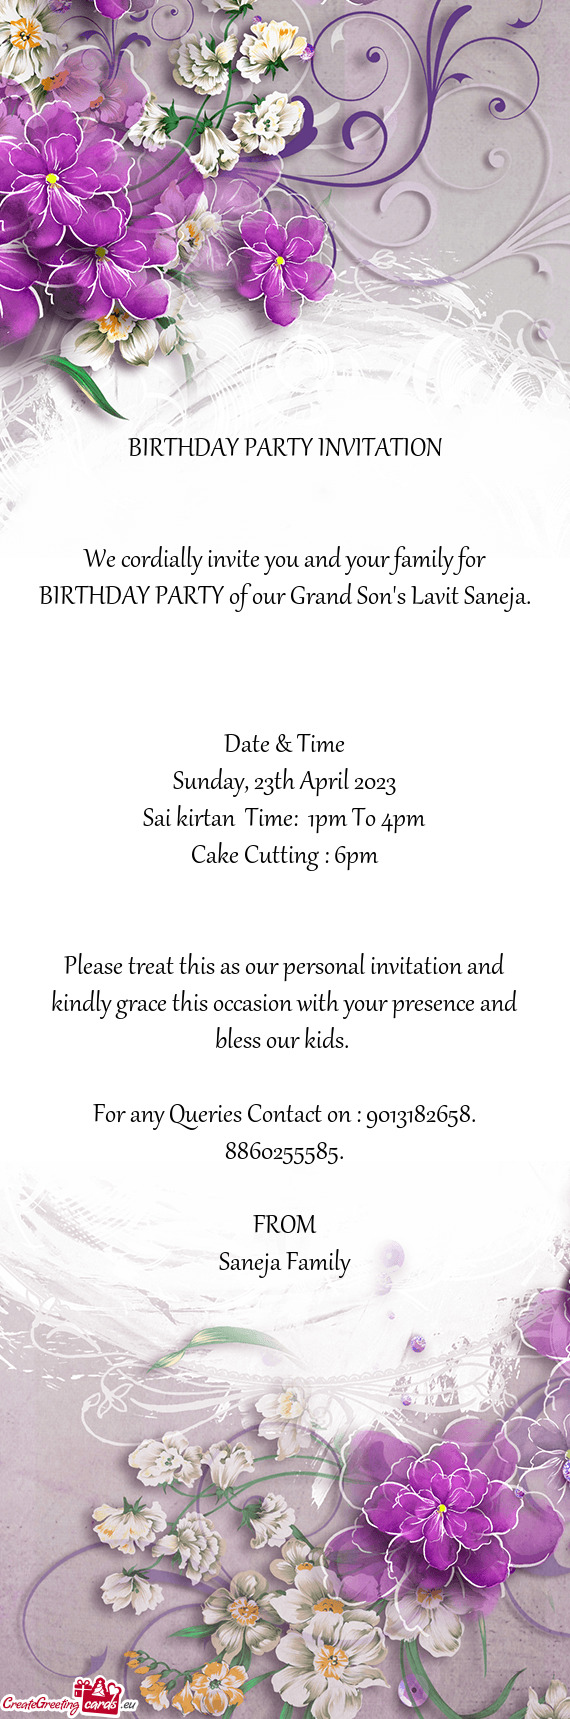 We cordially invite you and your family for BIRTHDAY PARTY of our Grand Son